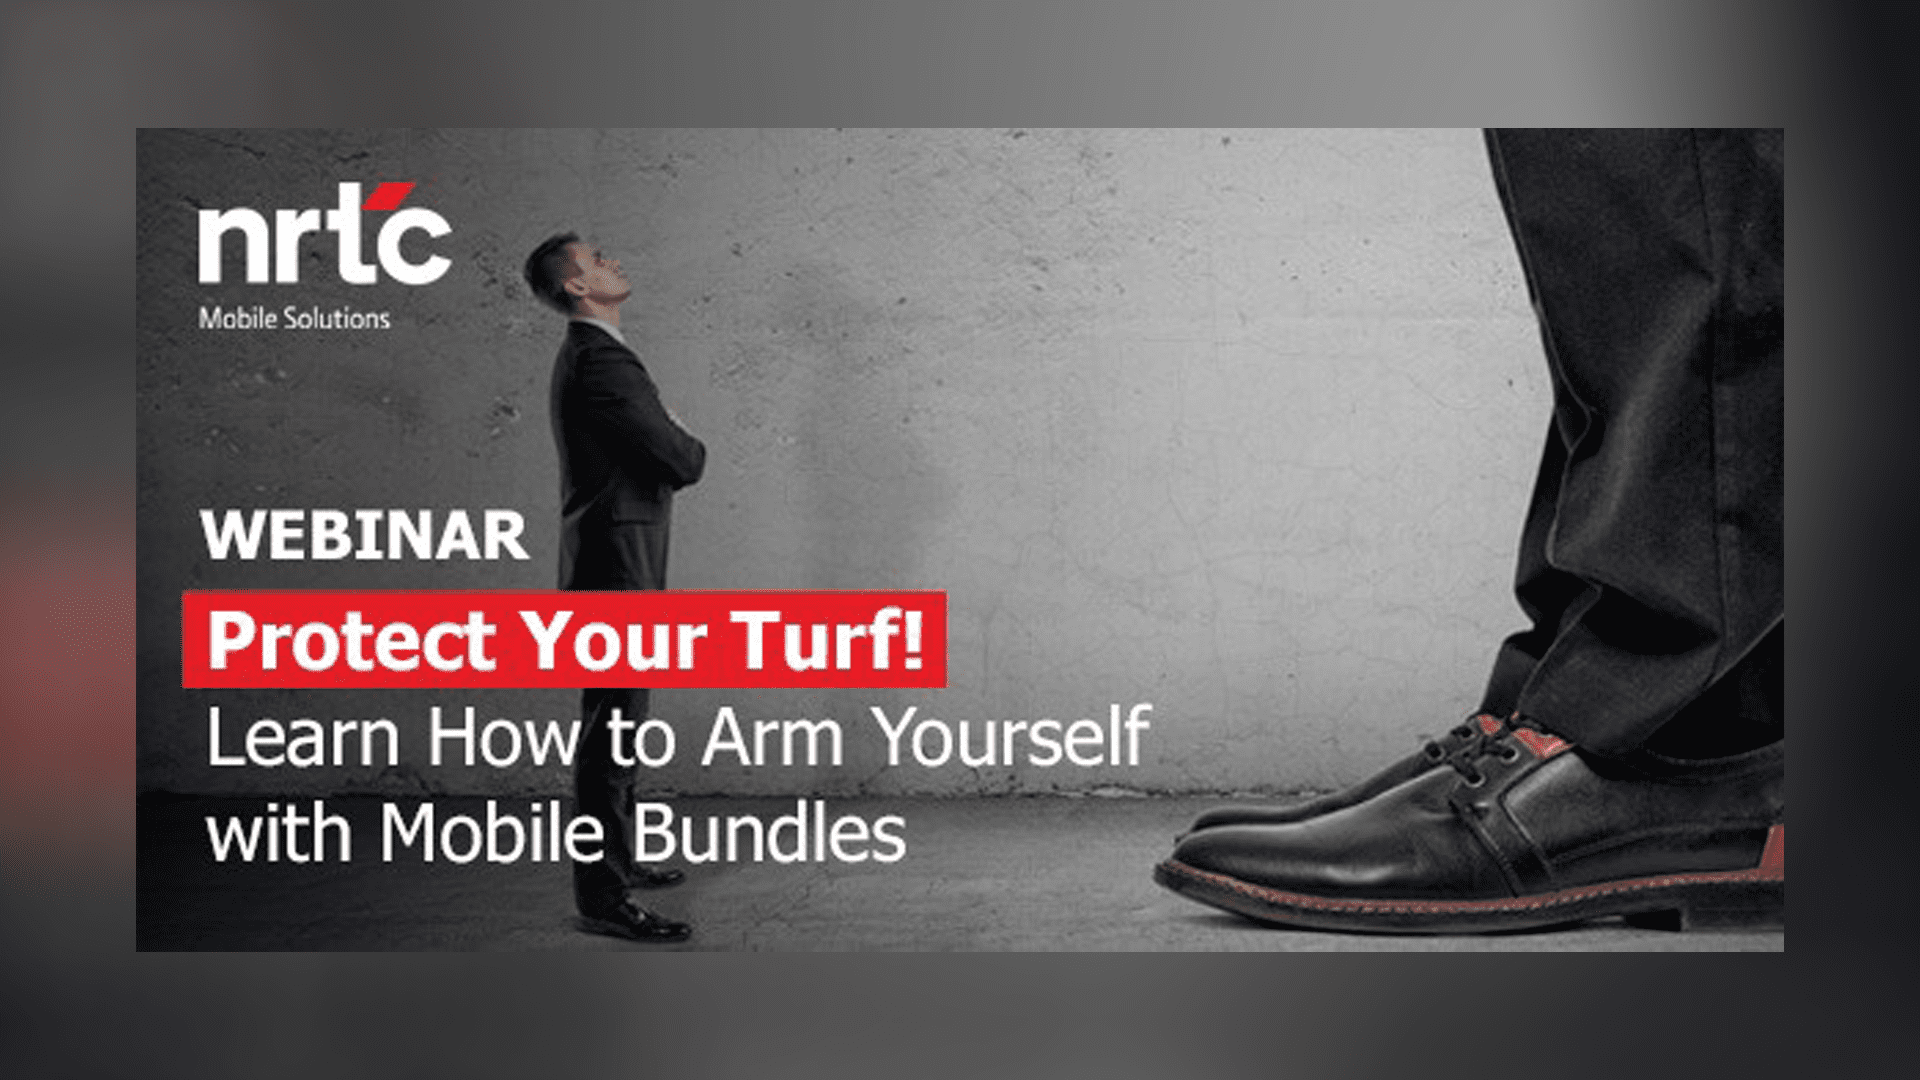 Webinar - Protect Your Turf! Learn How to Arm Yourself with Mobile Bundles